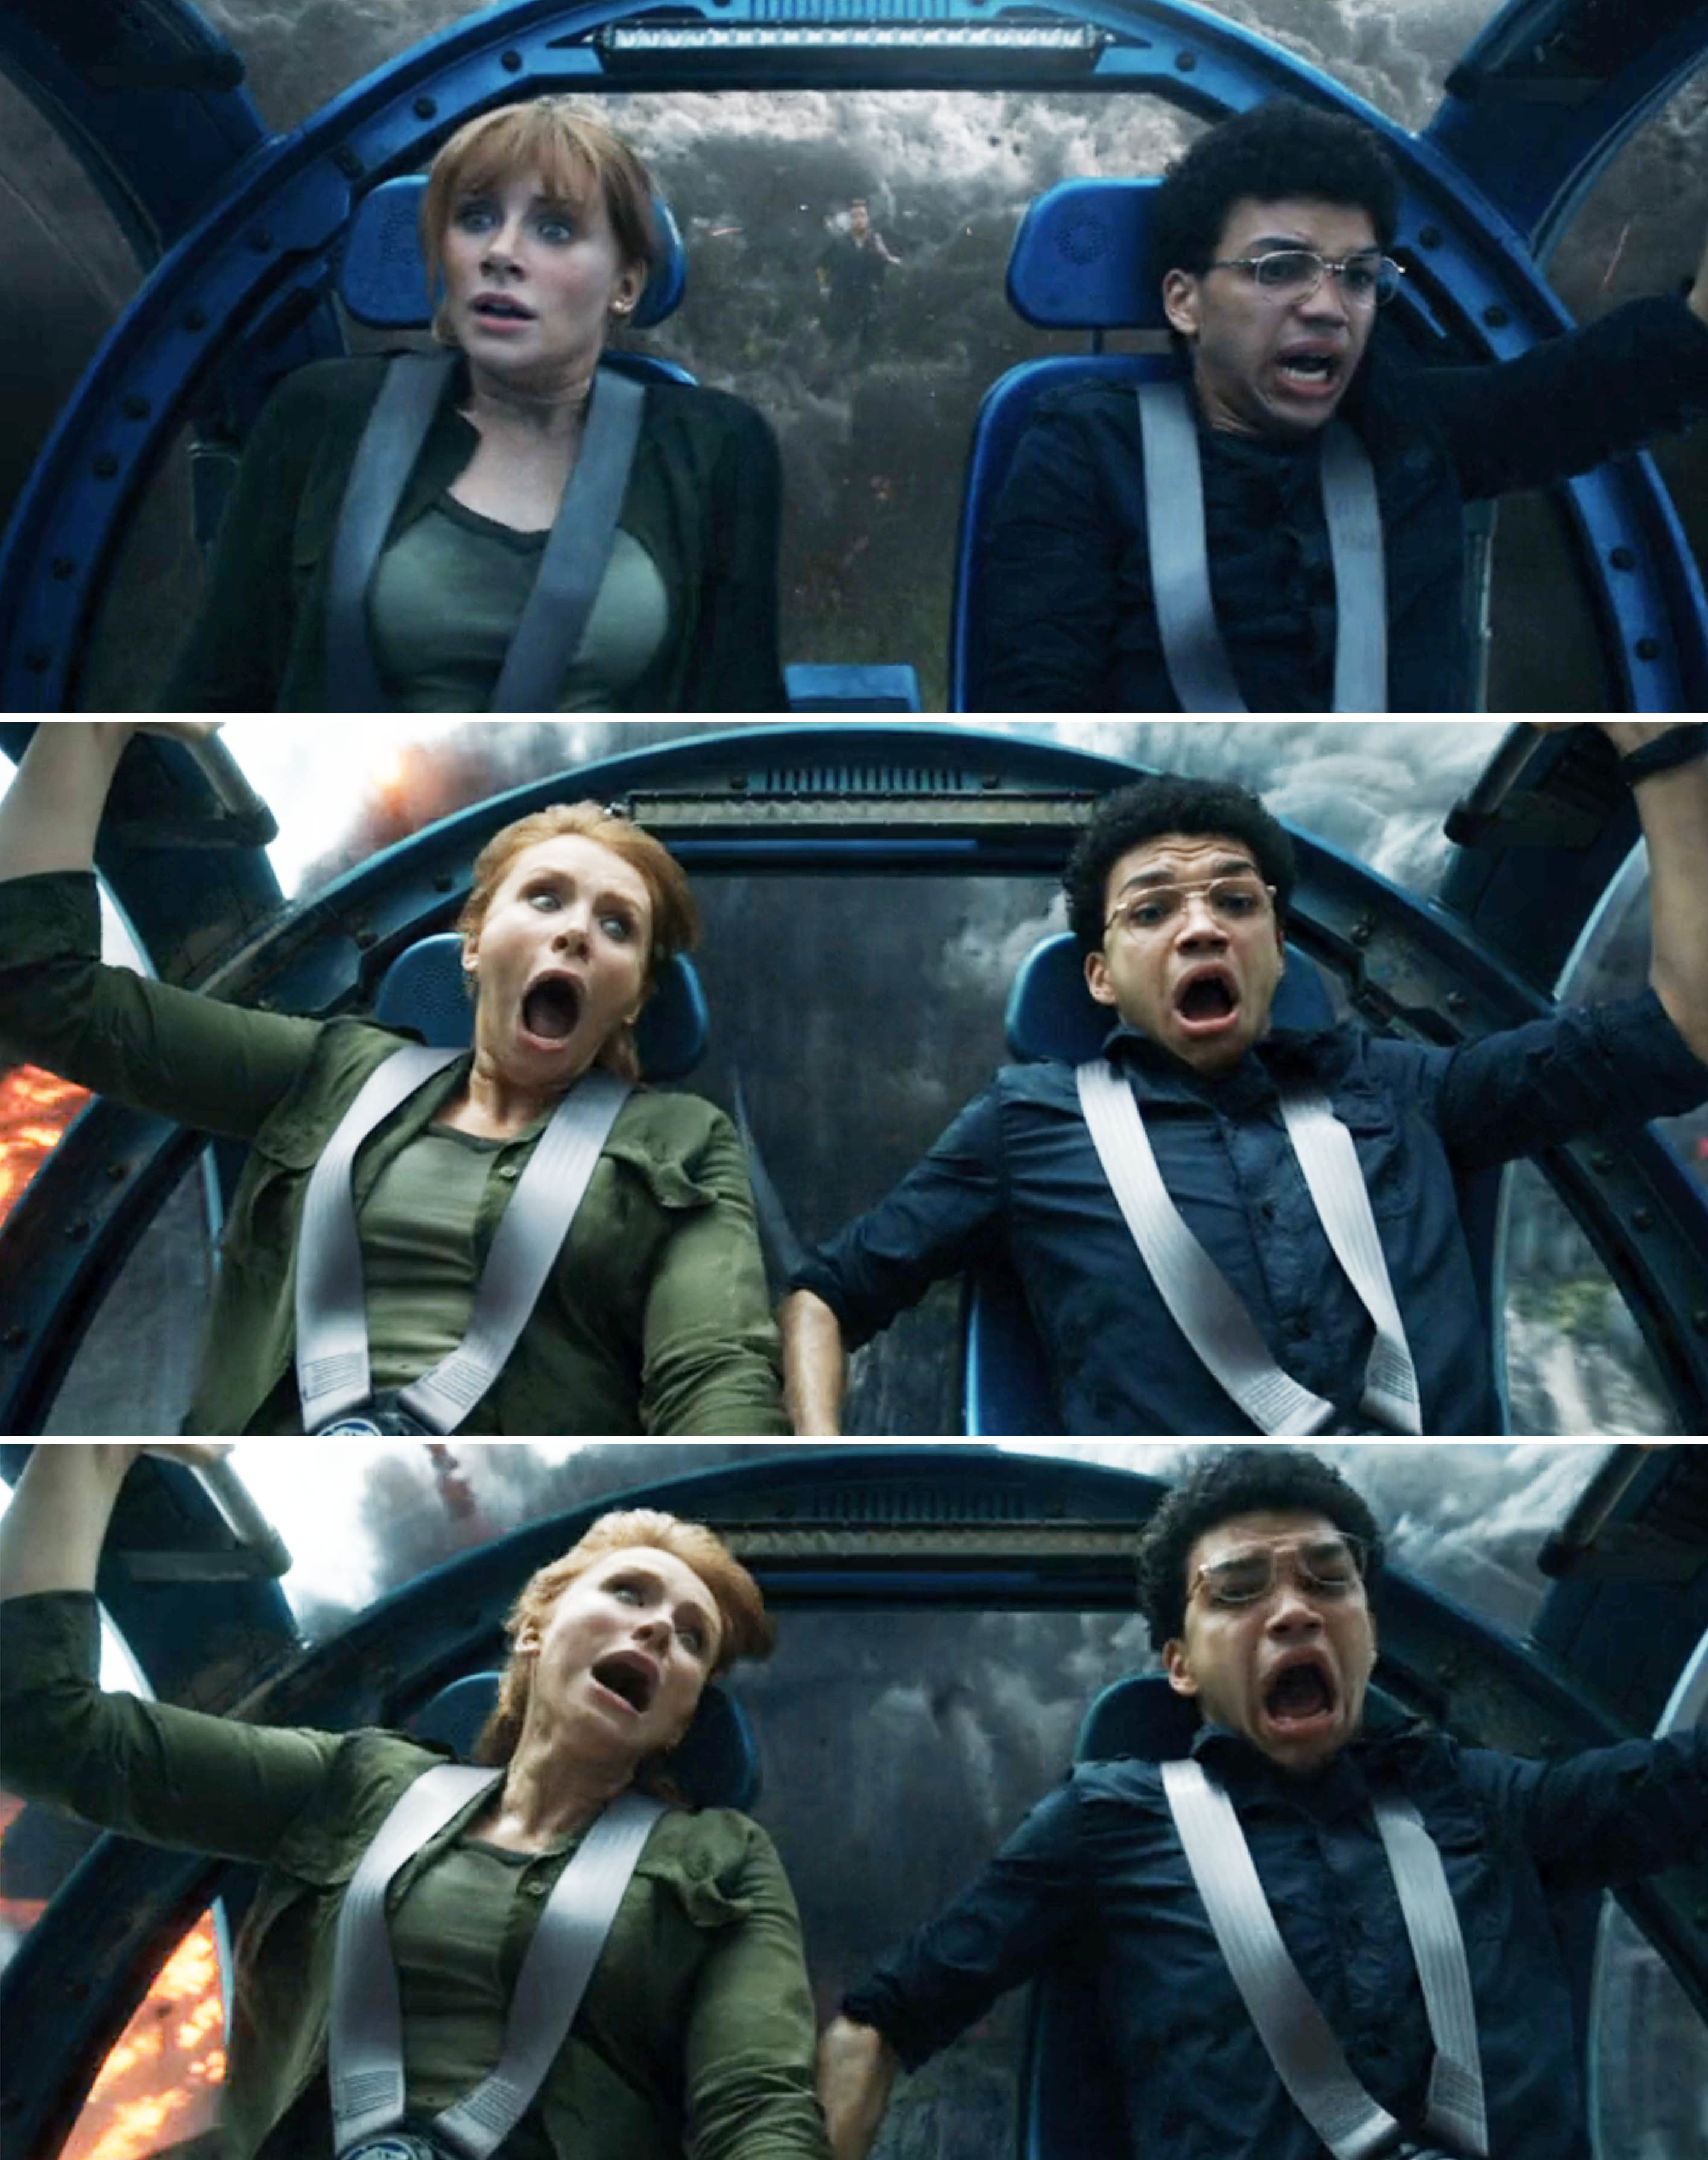 Claire and Franklin screaming while falling inside the gyrosphere in Jurassic World: Fallen Kingdom